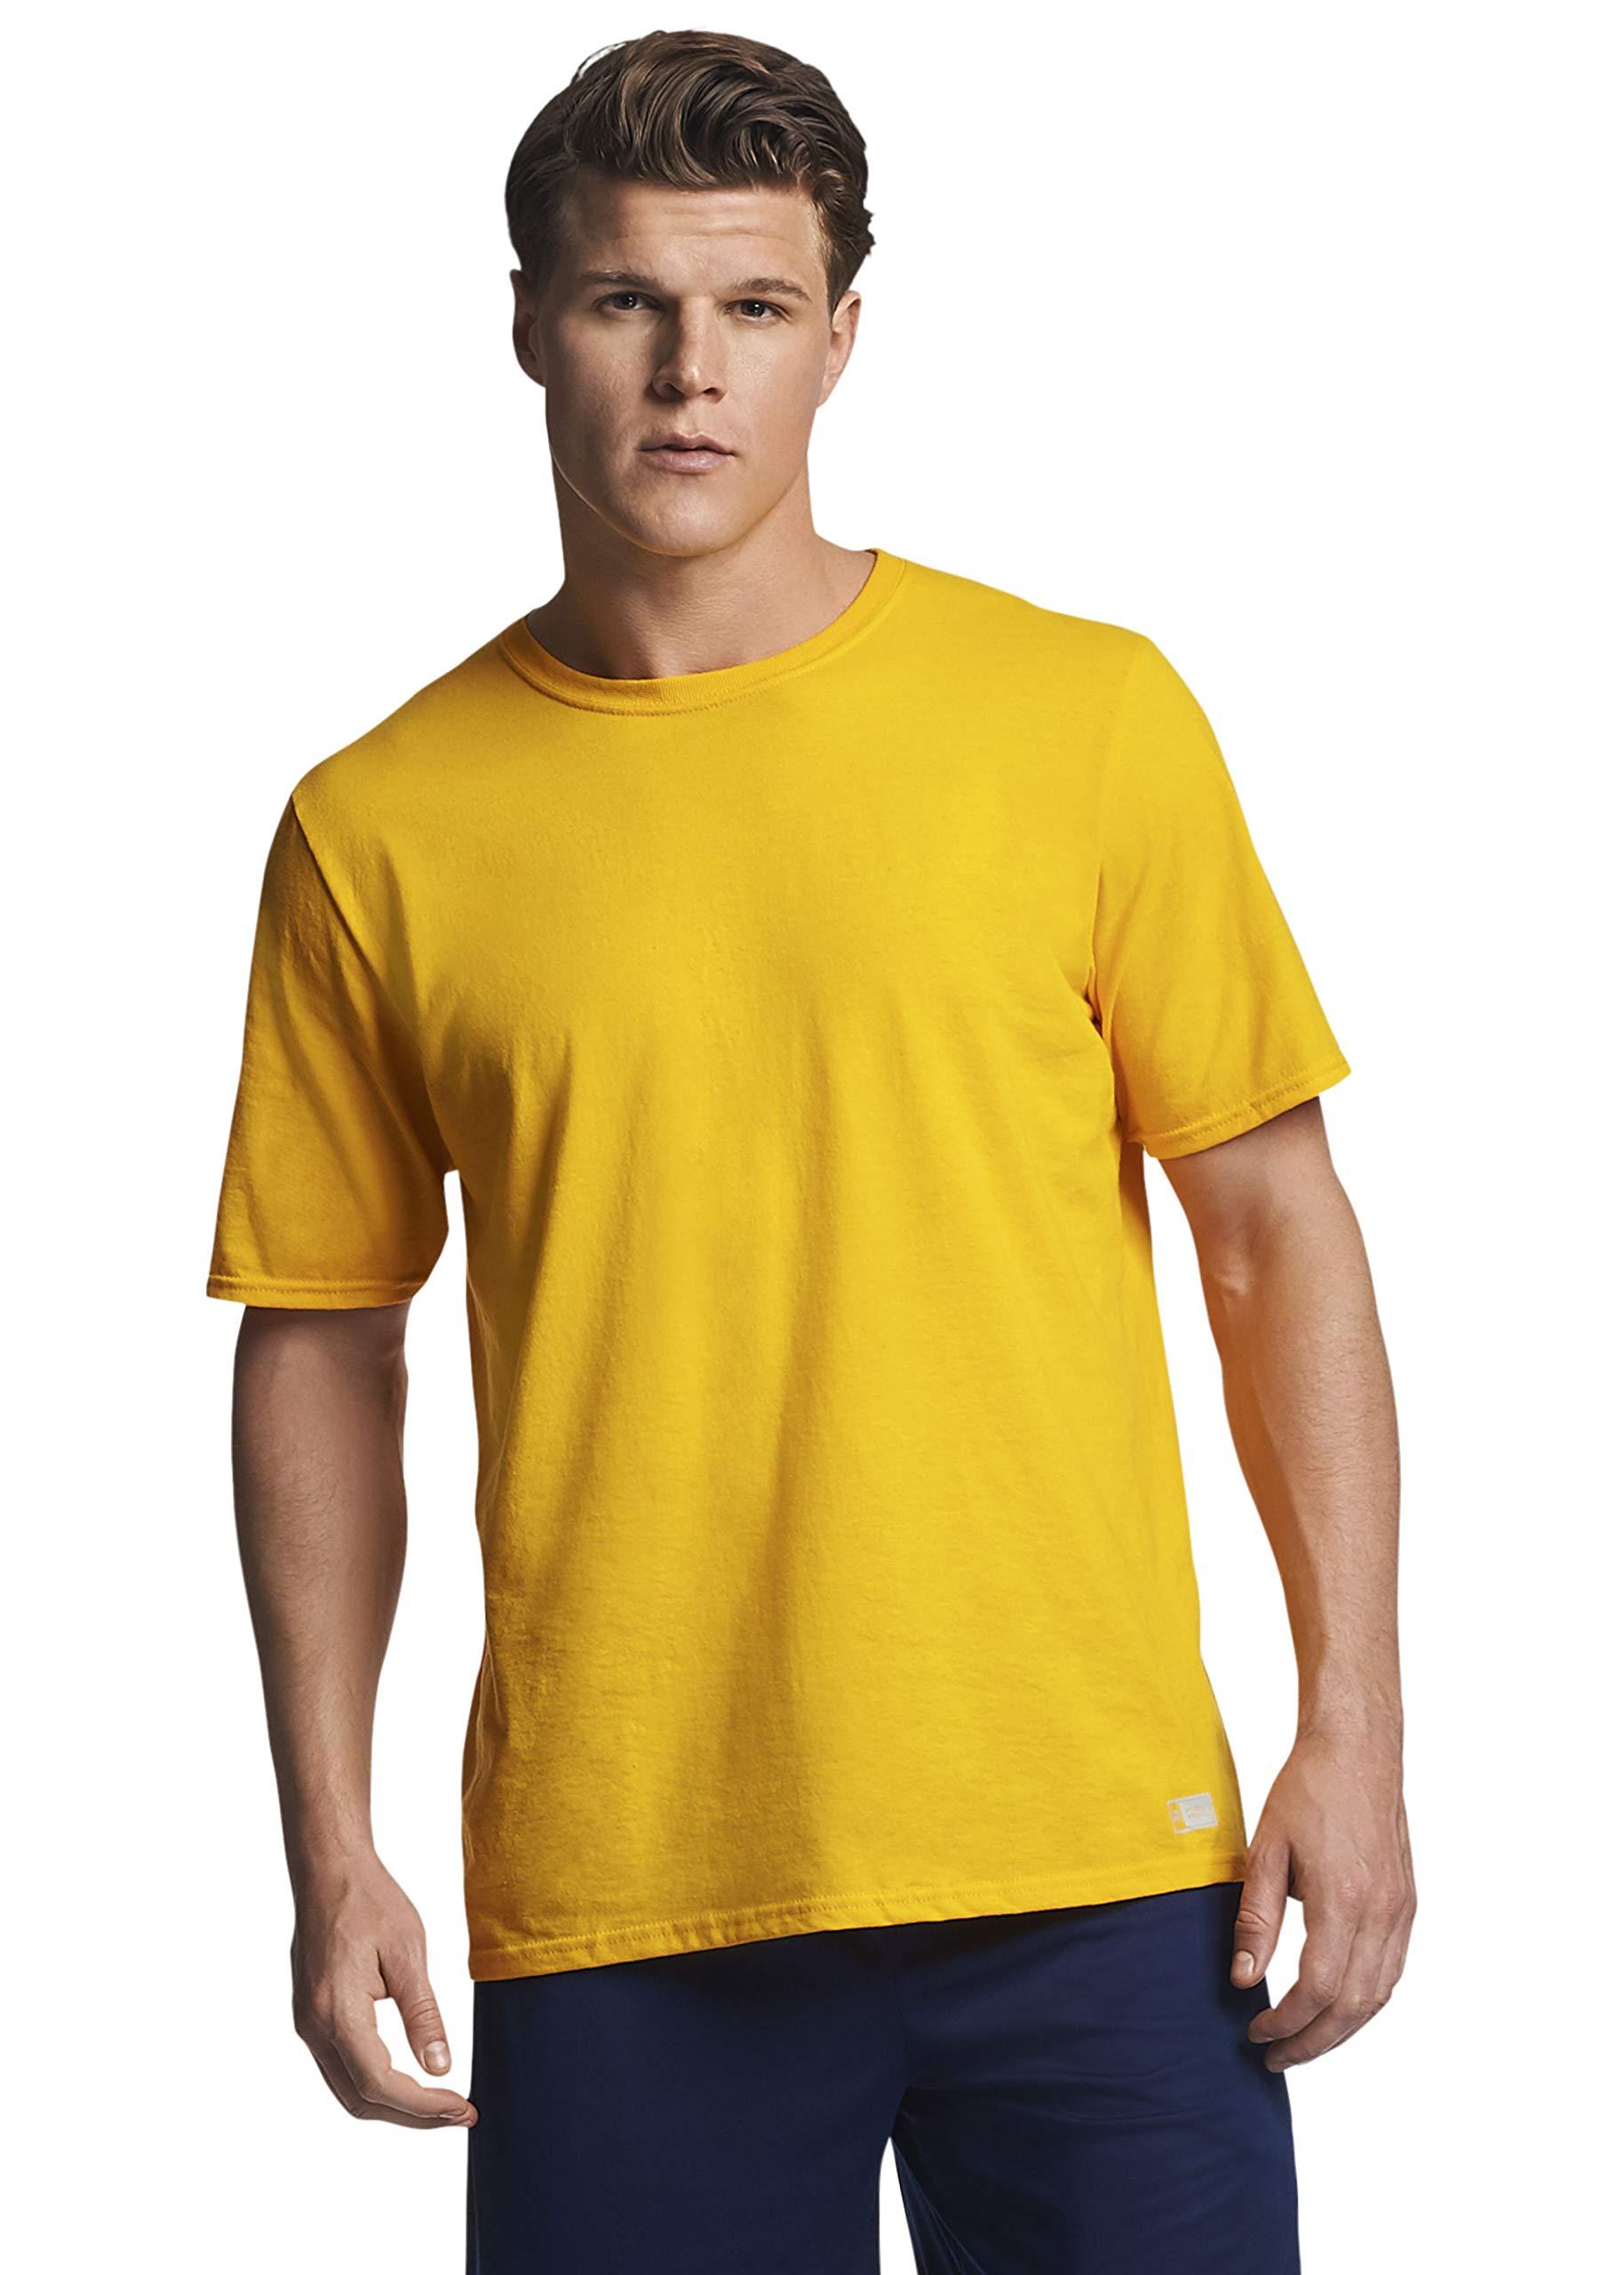 Russell Athletic Cotton Performance Short Sleeve T-shirt in Gold ...